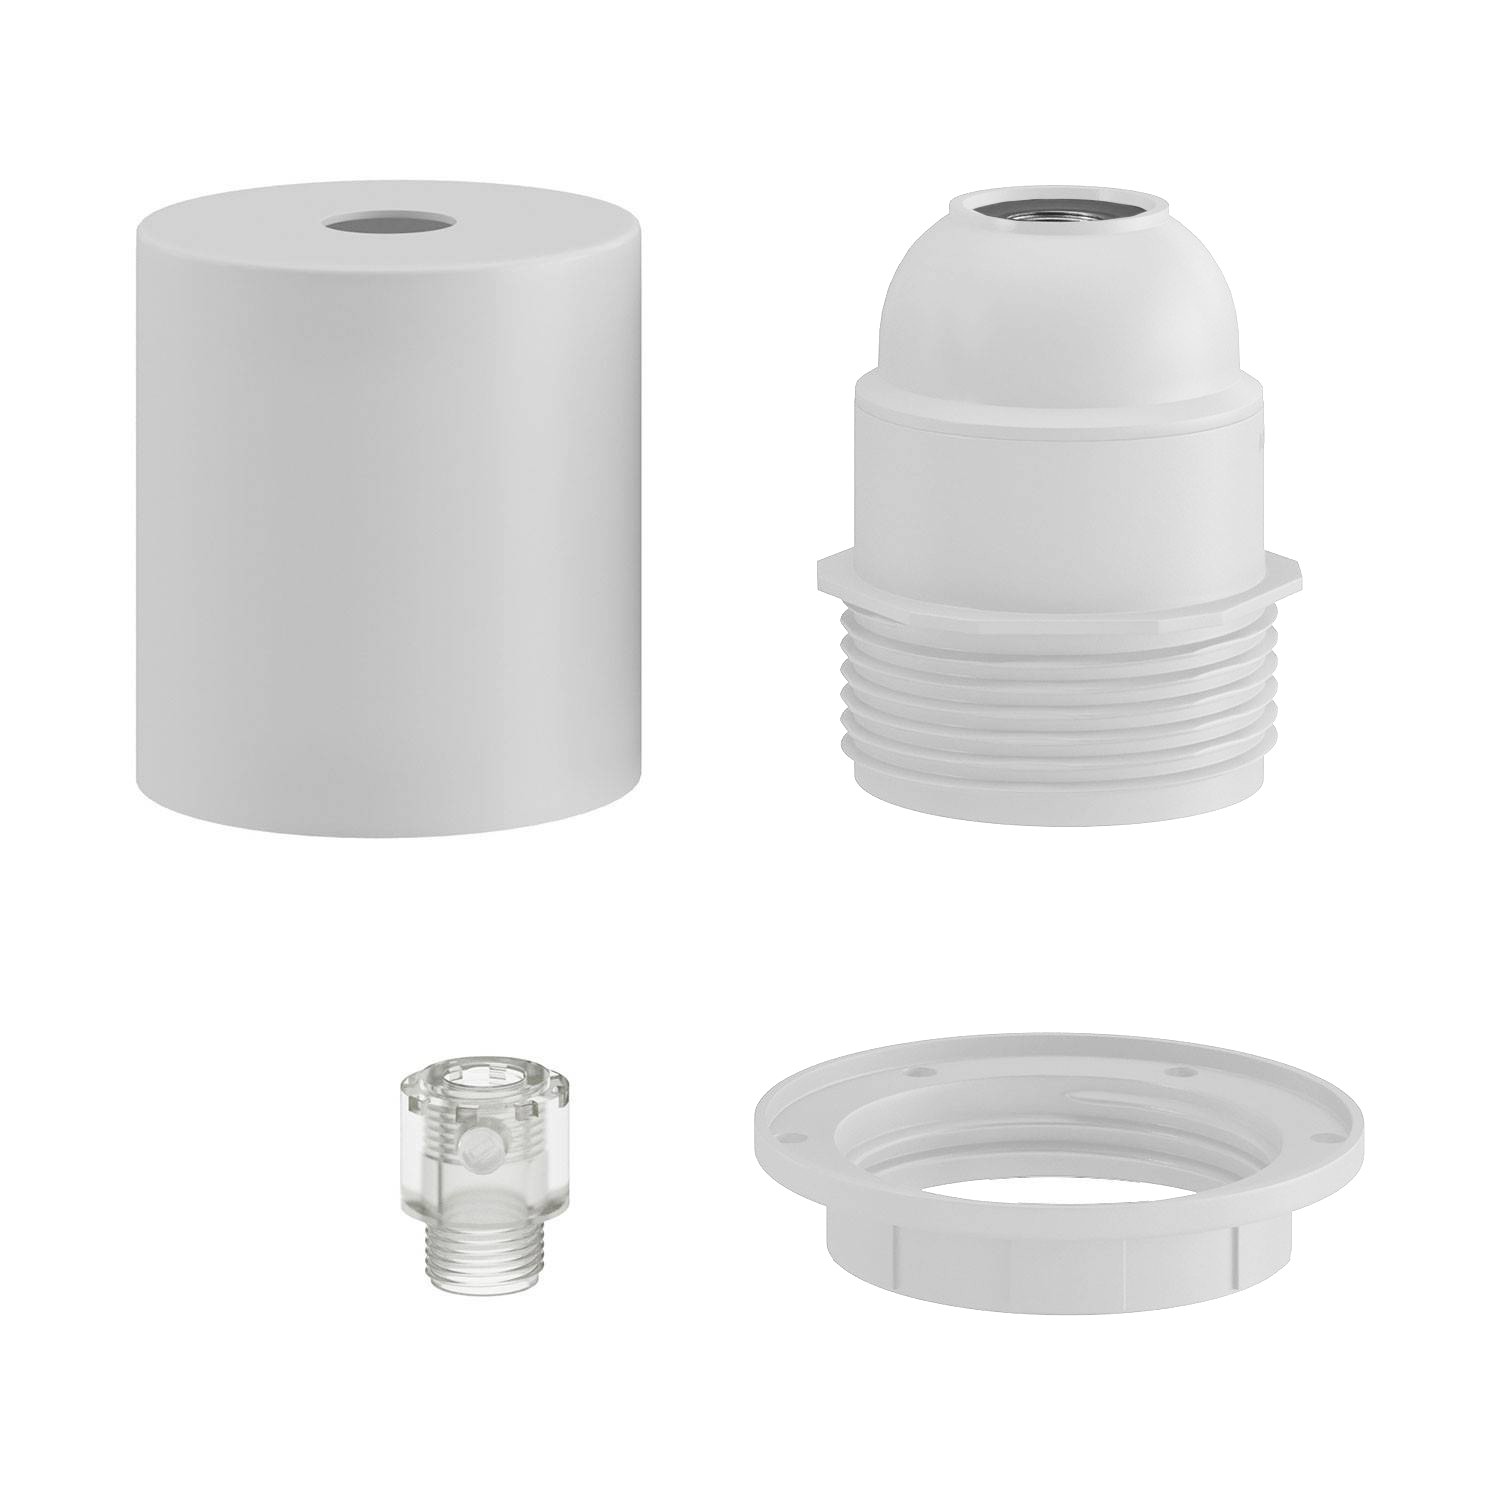 E27 semi-flush metal lamp holder kit with concealed cable clamp